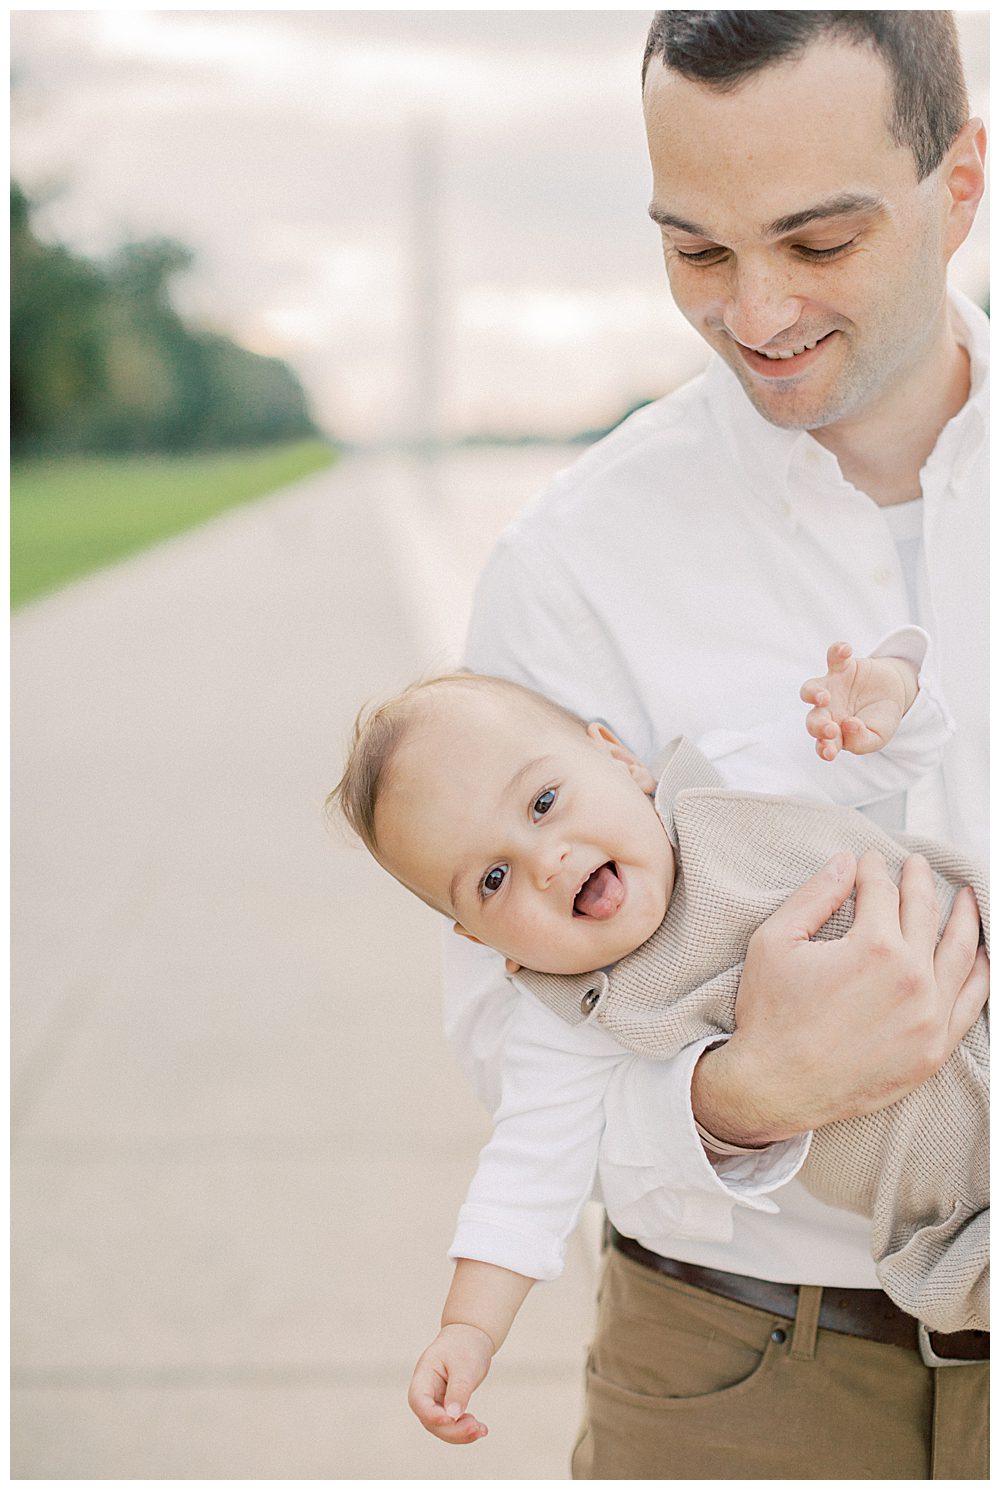 Toddler boy smiles while being held sideways by father during DC Monuments Family Photo Session.